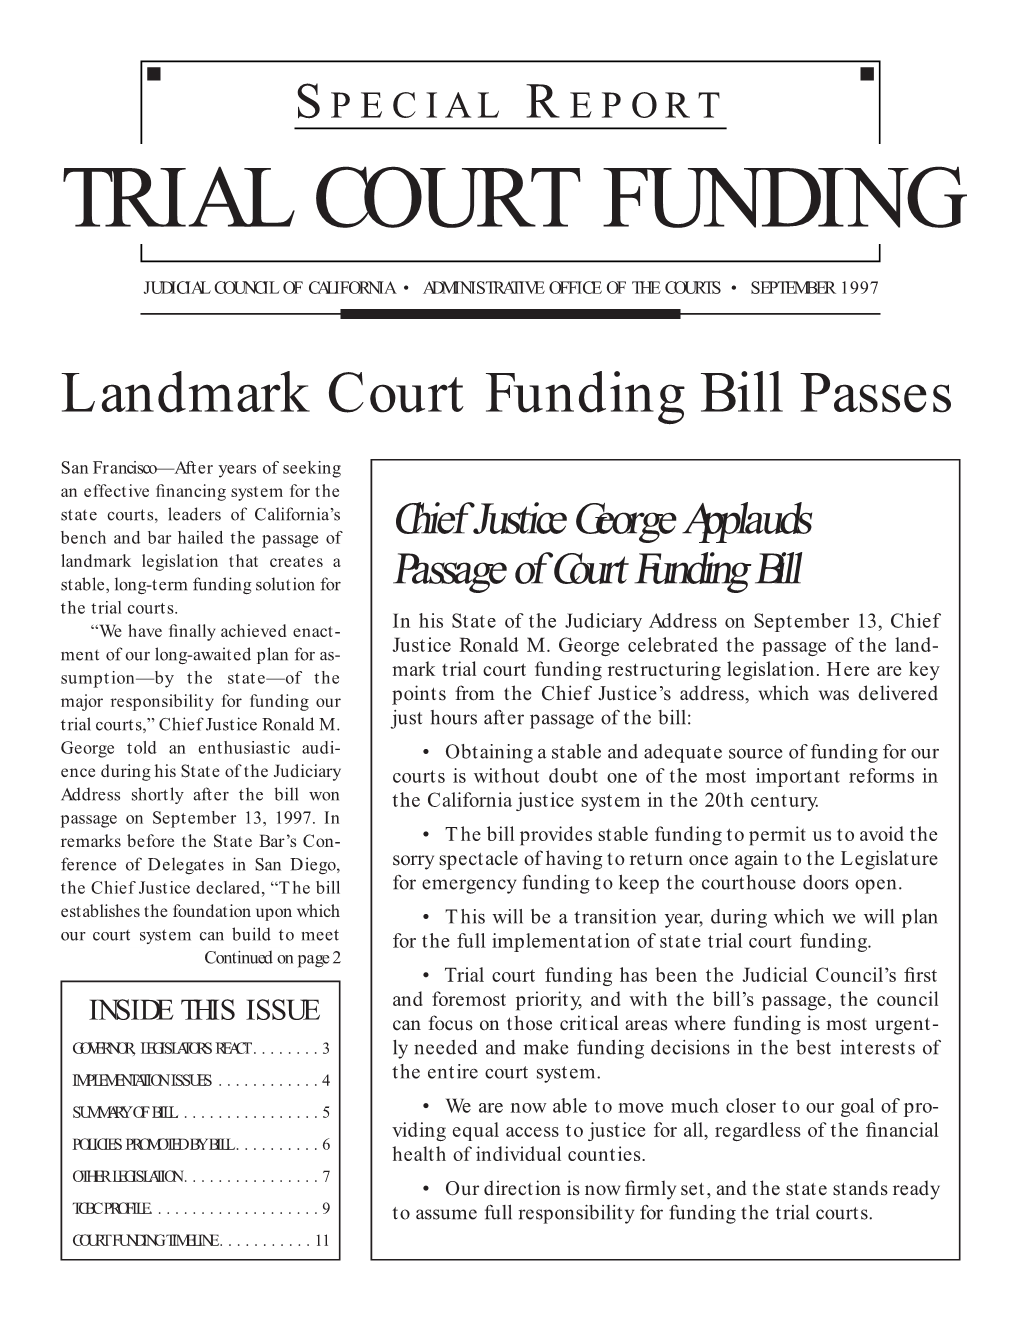 Special Report on Trial Court Funding